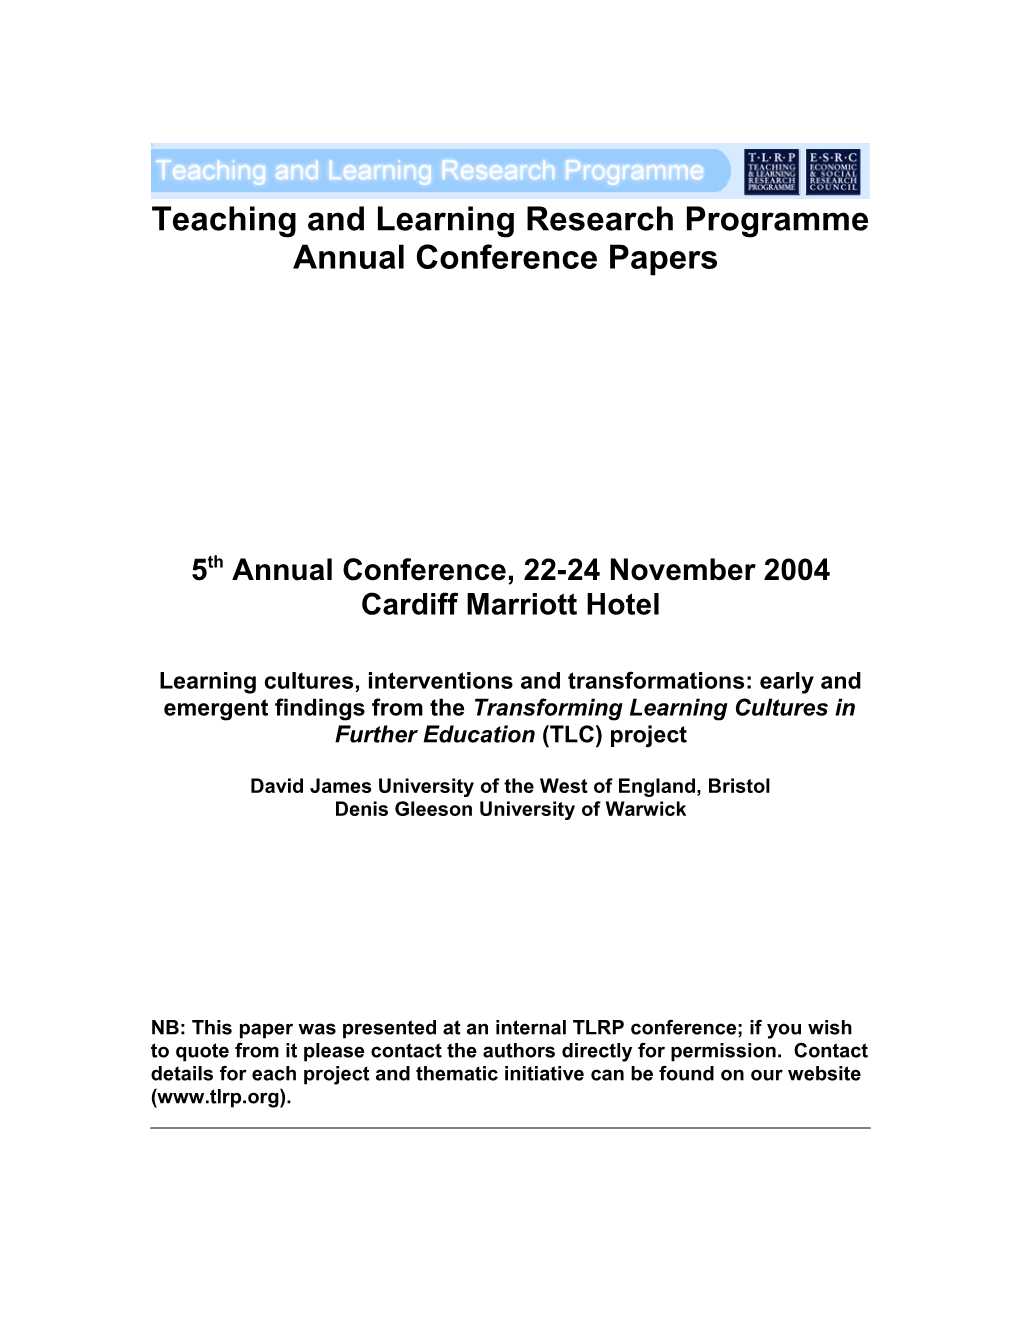 Transforming Learning Cultures in Further Education